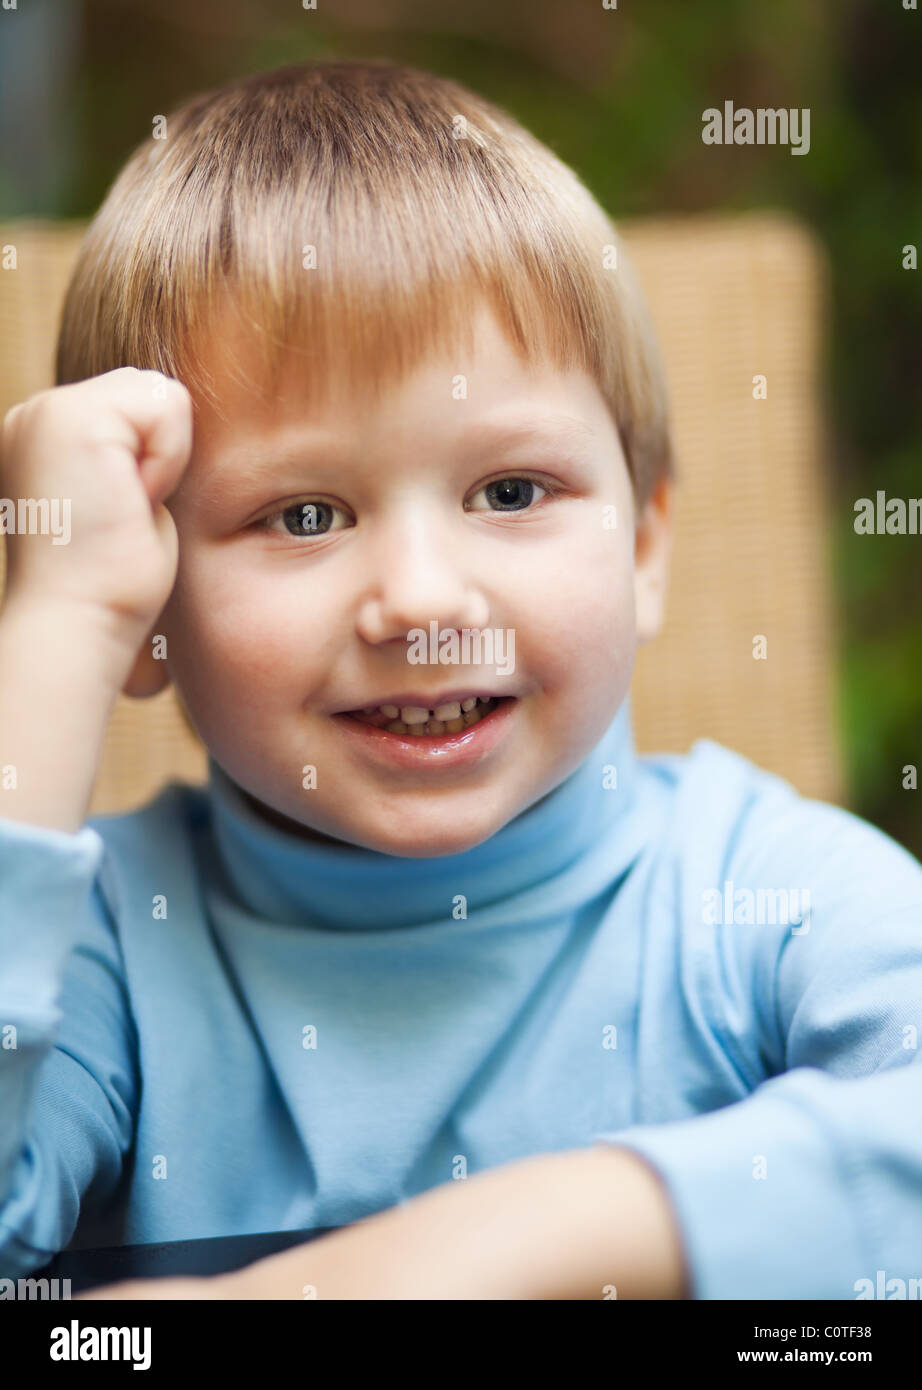 Portait of a cute smiling blond boy photographed indoors Stock Photo